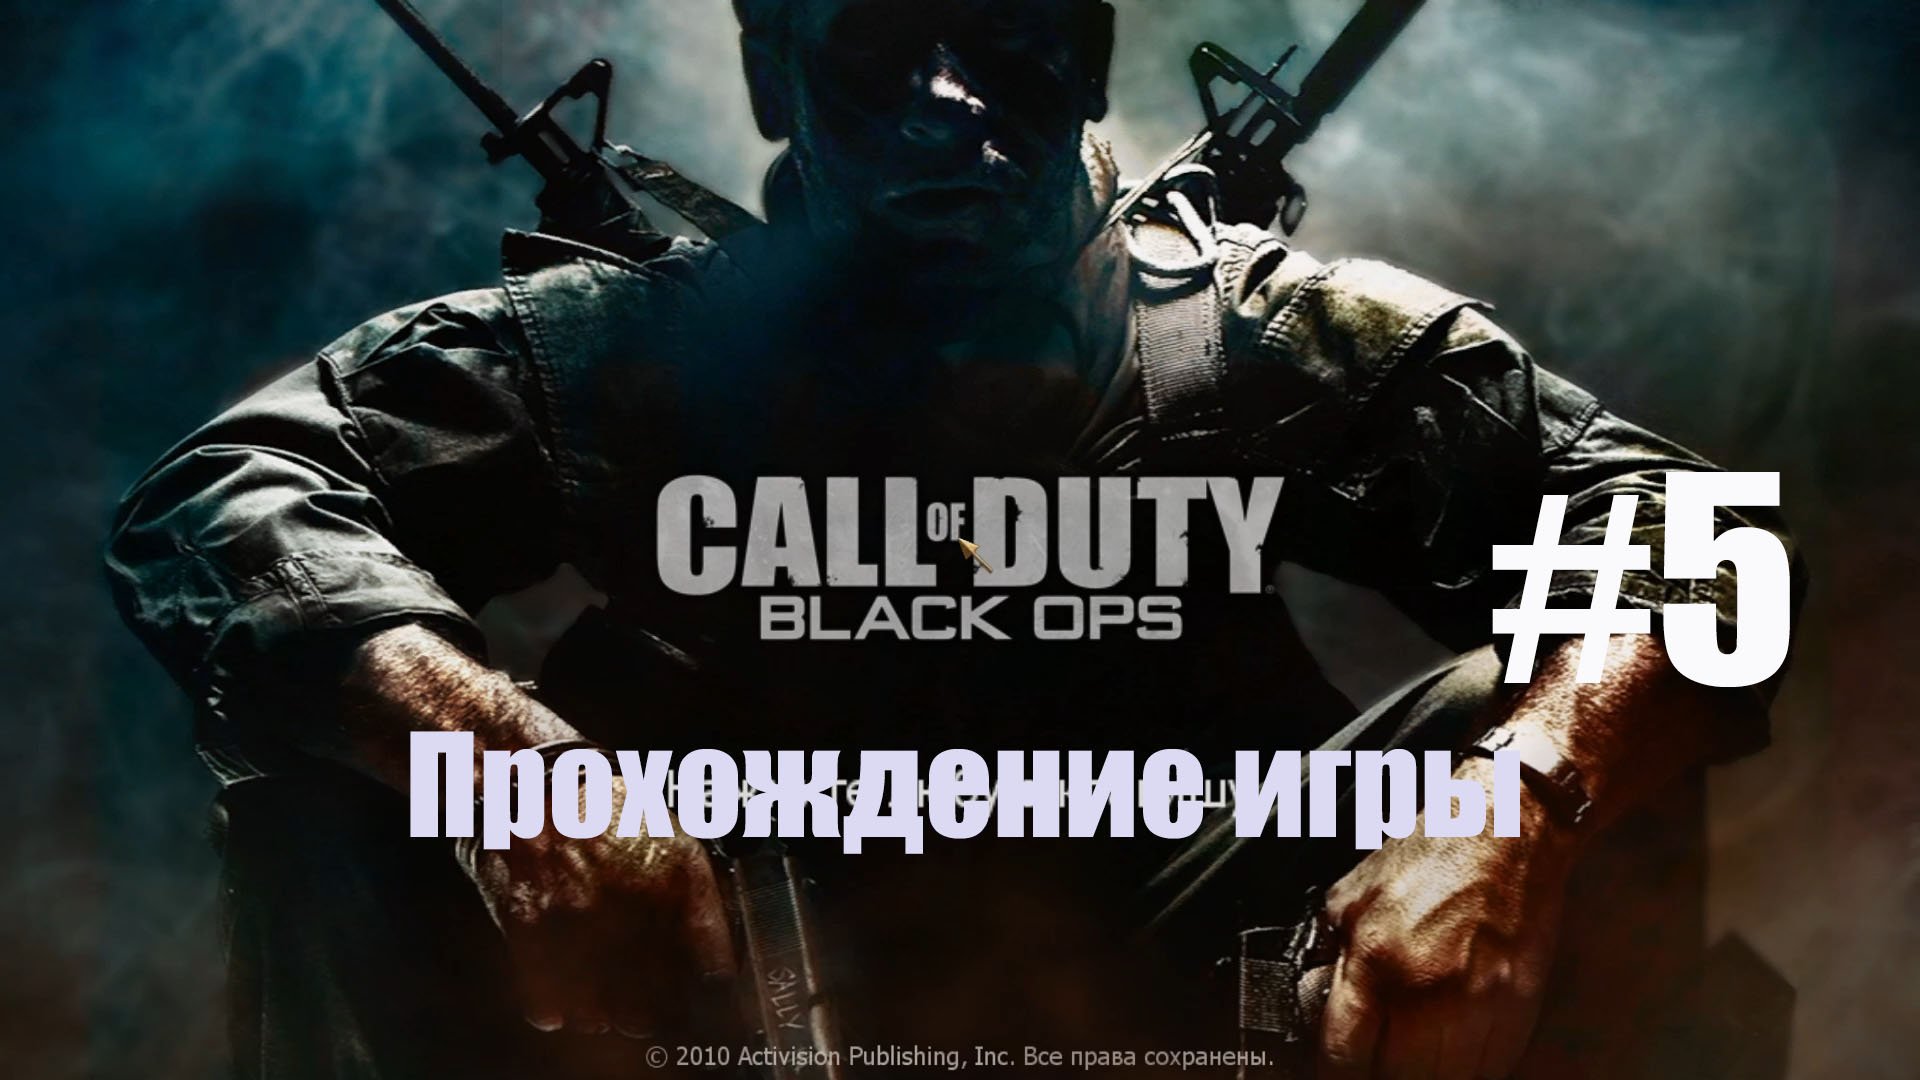 Call of Duty Black Ops #5